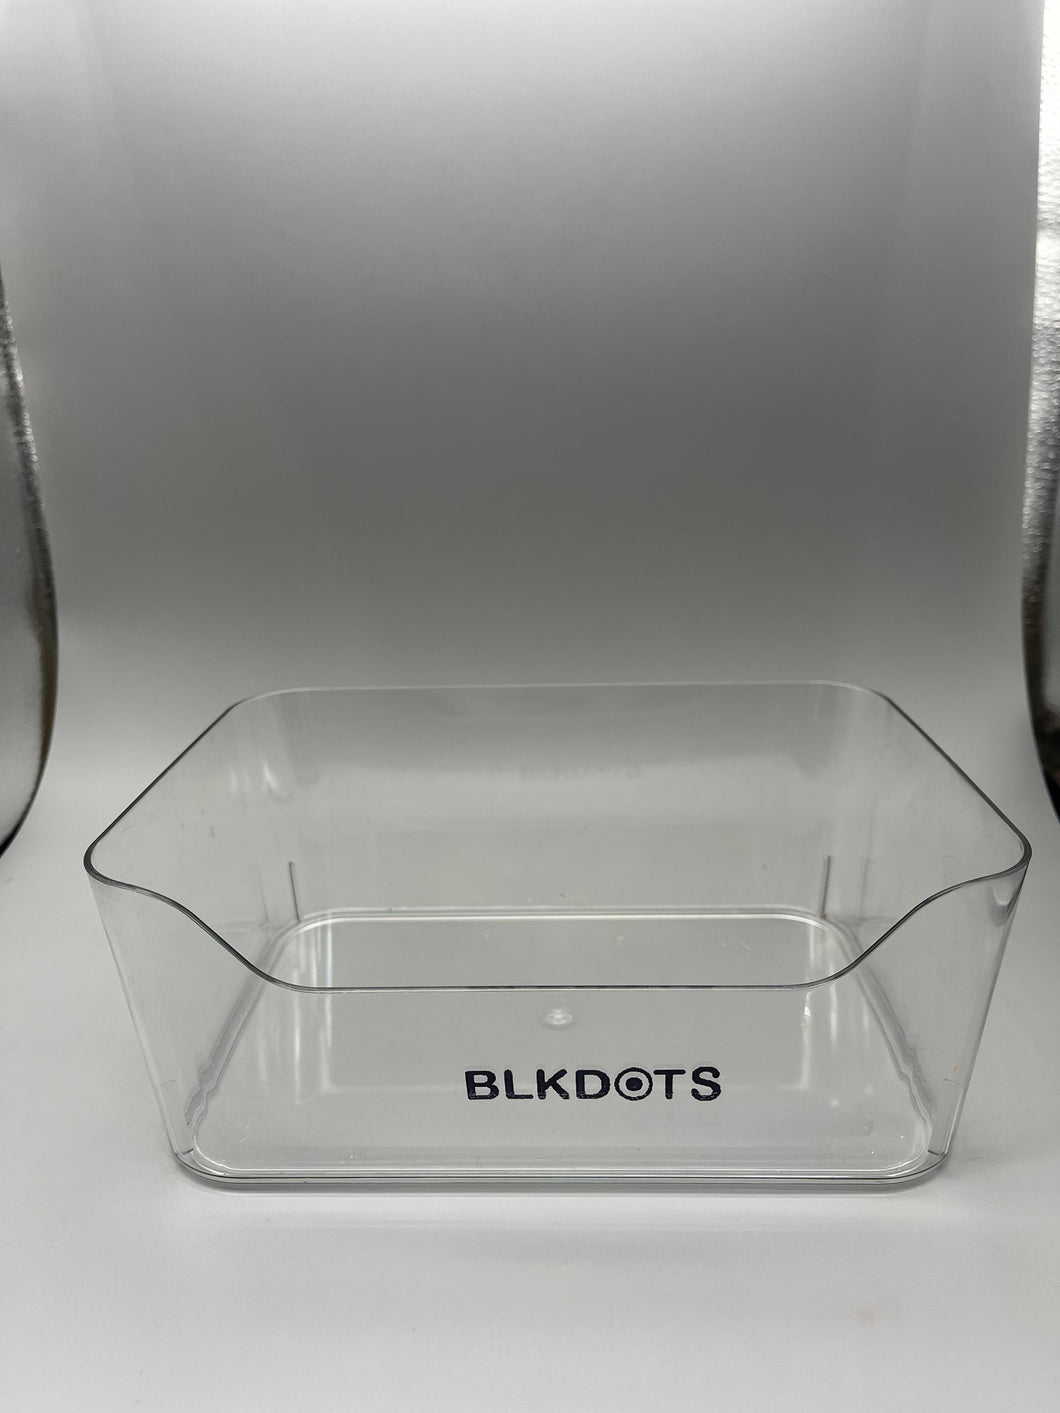 BLKDOTS Plastic storage containers for household use,Clear Plastic Storage Organizer Container Bins with Cutout Handles, Transparent Set of 4, BPA Free, Cabinet Storage Bins for Kitchen Food Pantry Refrigerator Bathroom